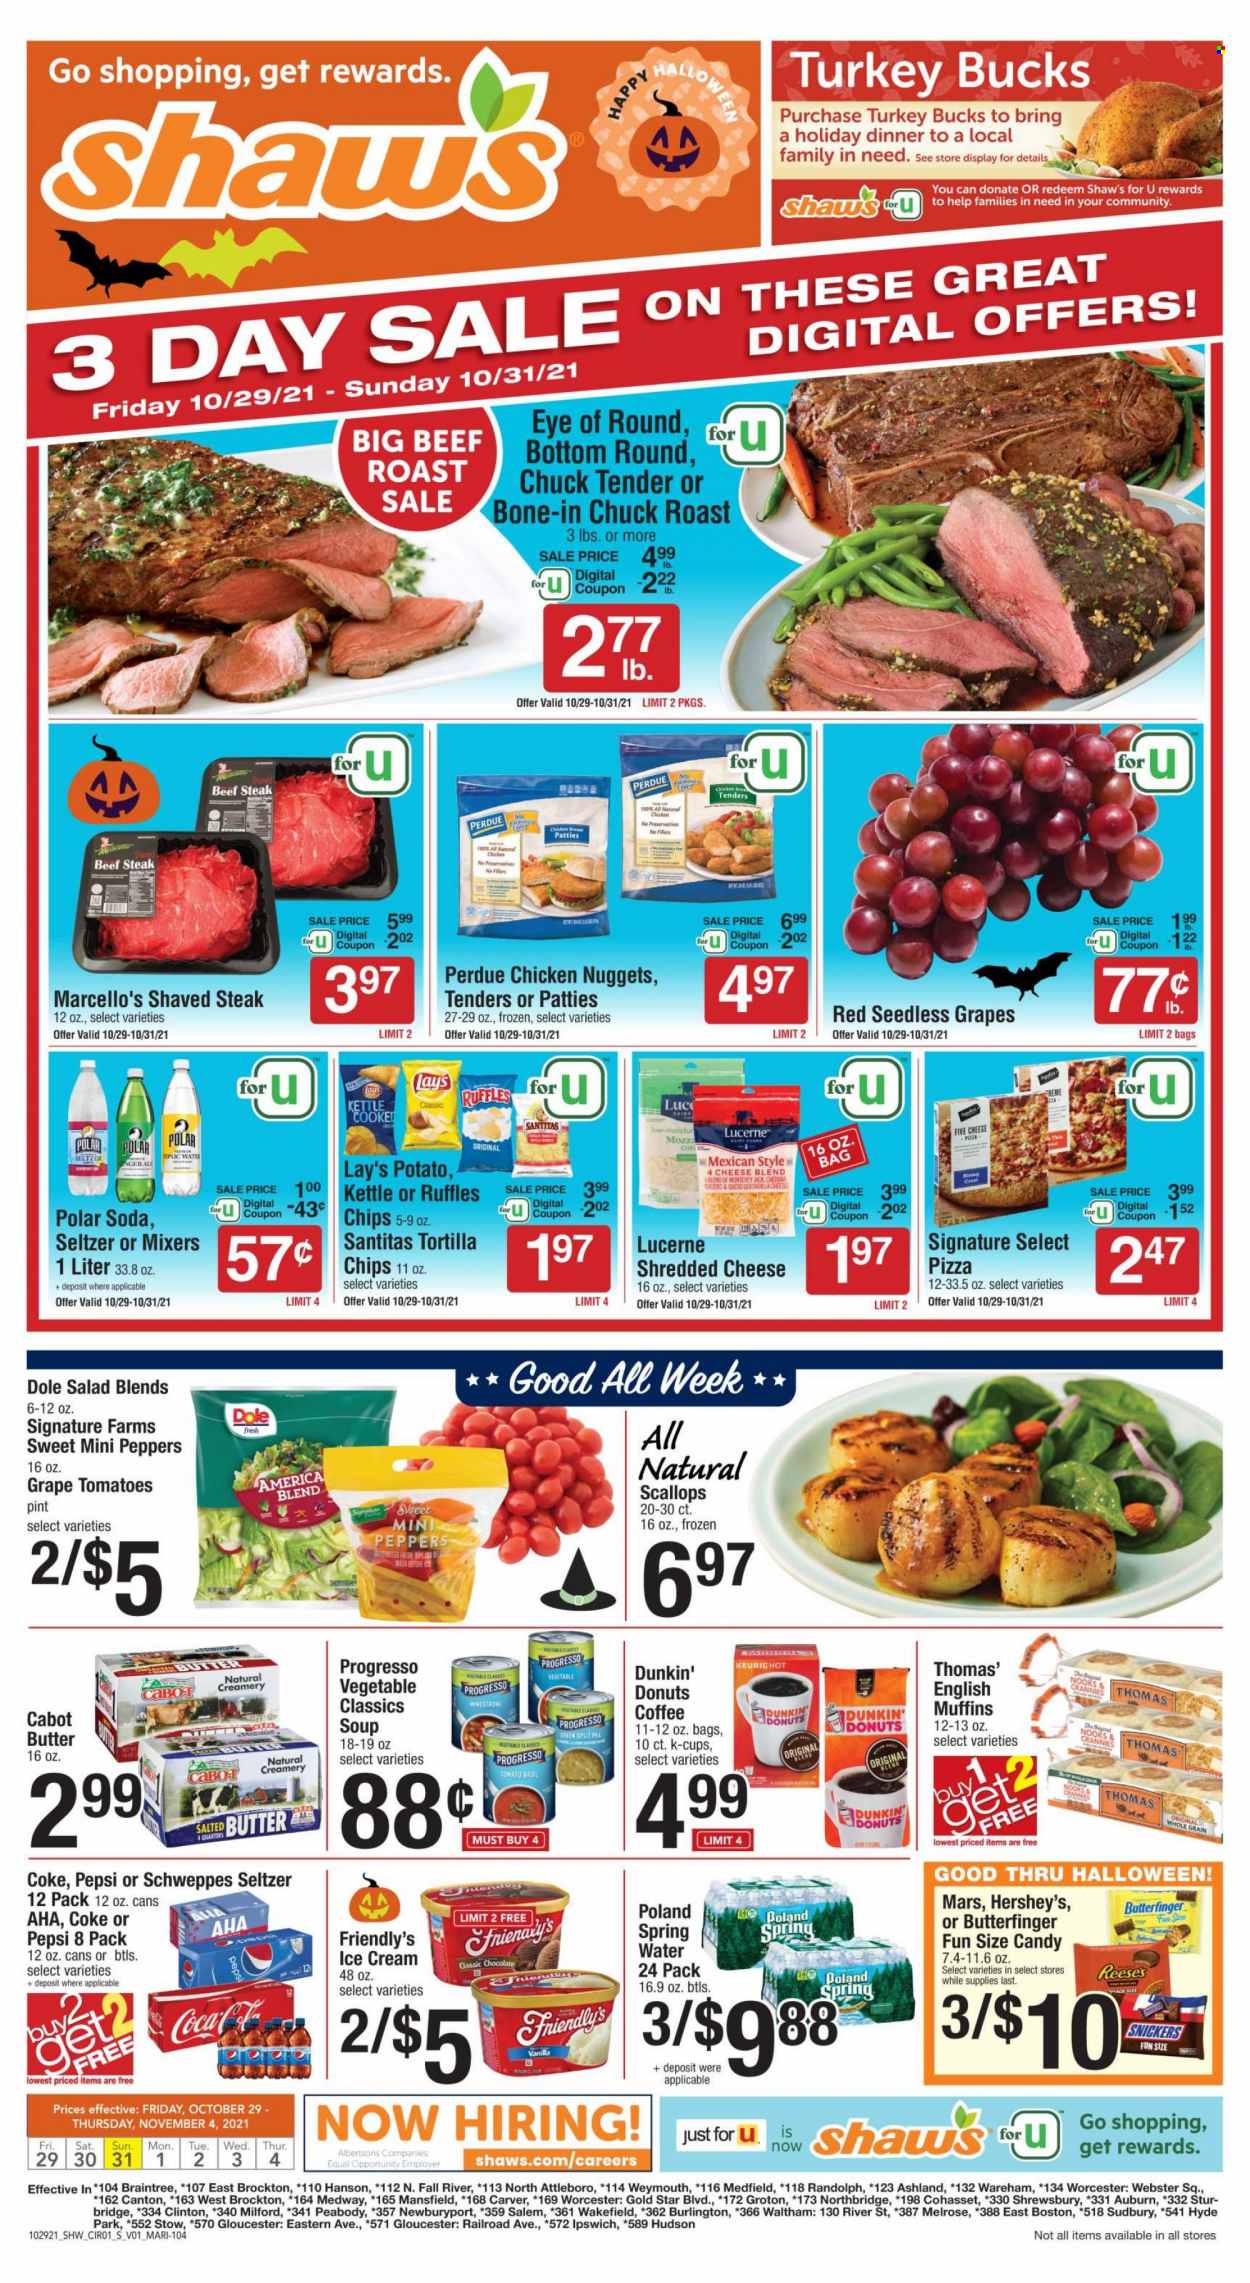 thumbnail - Shaw’s Flyer - 10/29/2021 - 11/04/2021 - Sales products - english muffins, tortillas, Dunkin' Donuts, salad greens, salad, Dole, peppers, seedless grapes, scallops, pizza, soup, nuggets, chicken nuggets, Progresso, Perdue®, ready meal, roast beef, shredded cheese, salted butter, ice cream, Reese's, Hershey's, Friendly's Ice Cream, Snickers, Mars, Halloween, Candy, sweets, Lay’s, Ruffles, Coca-Cola, Schweppes, Pepsi, soft drink, Coke, seltzer water, soda, carbonated soft drink, coffee capsules, K-Cups, Keurig, beef steak, steak, eye of round, chuck roast, chuck tender. Page 1.